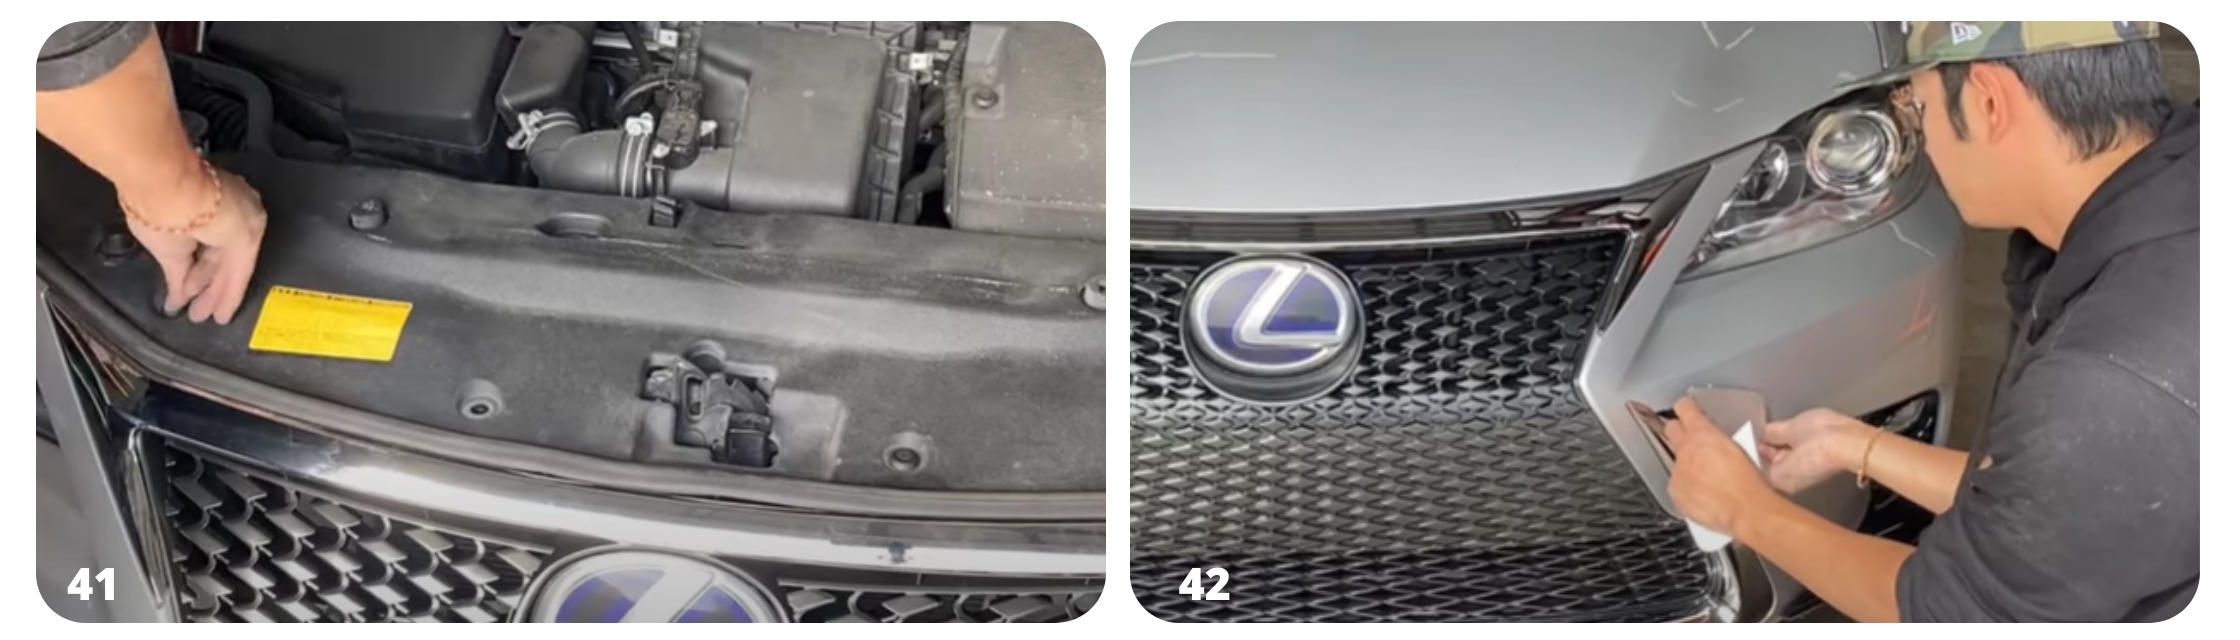 Vehicle conversion of Lexus CT200H Base Model to F-Sport steps 41-42